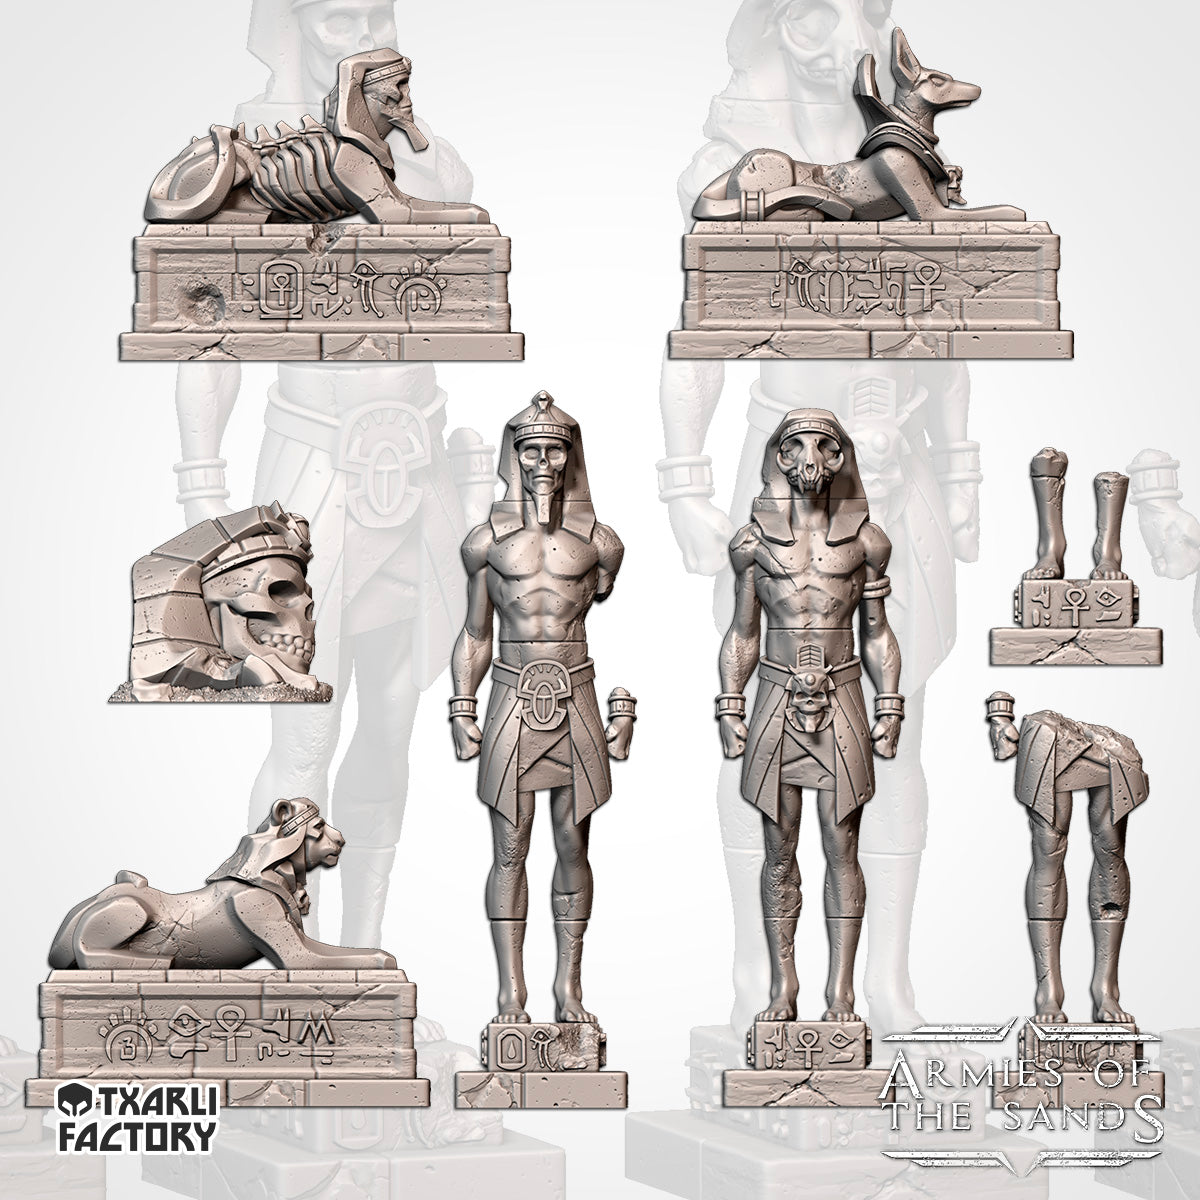 Egyptian Unit Fillers | Armies of the Sands | Txarli Factory  |